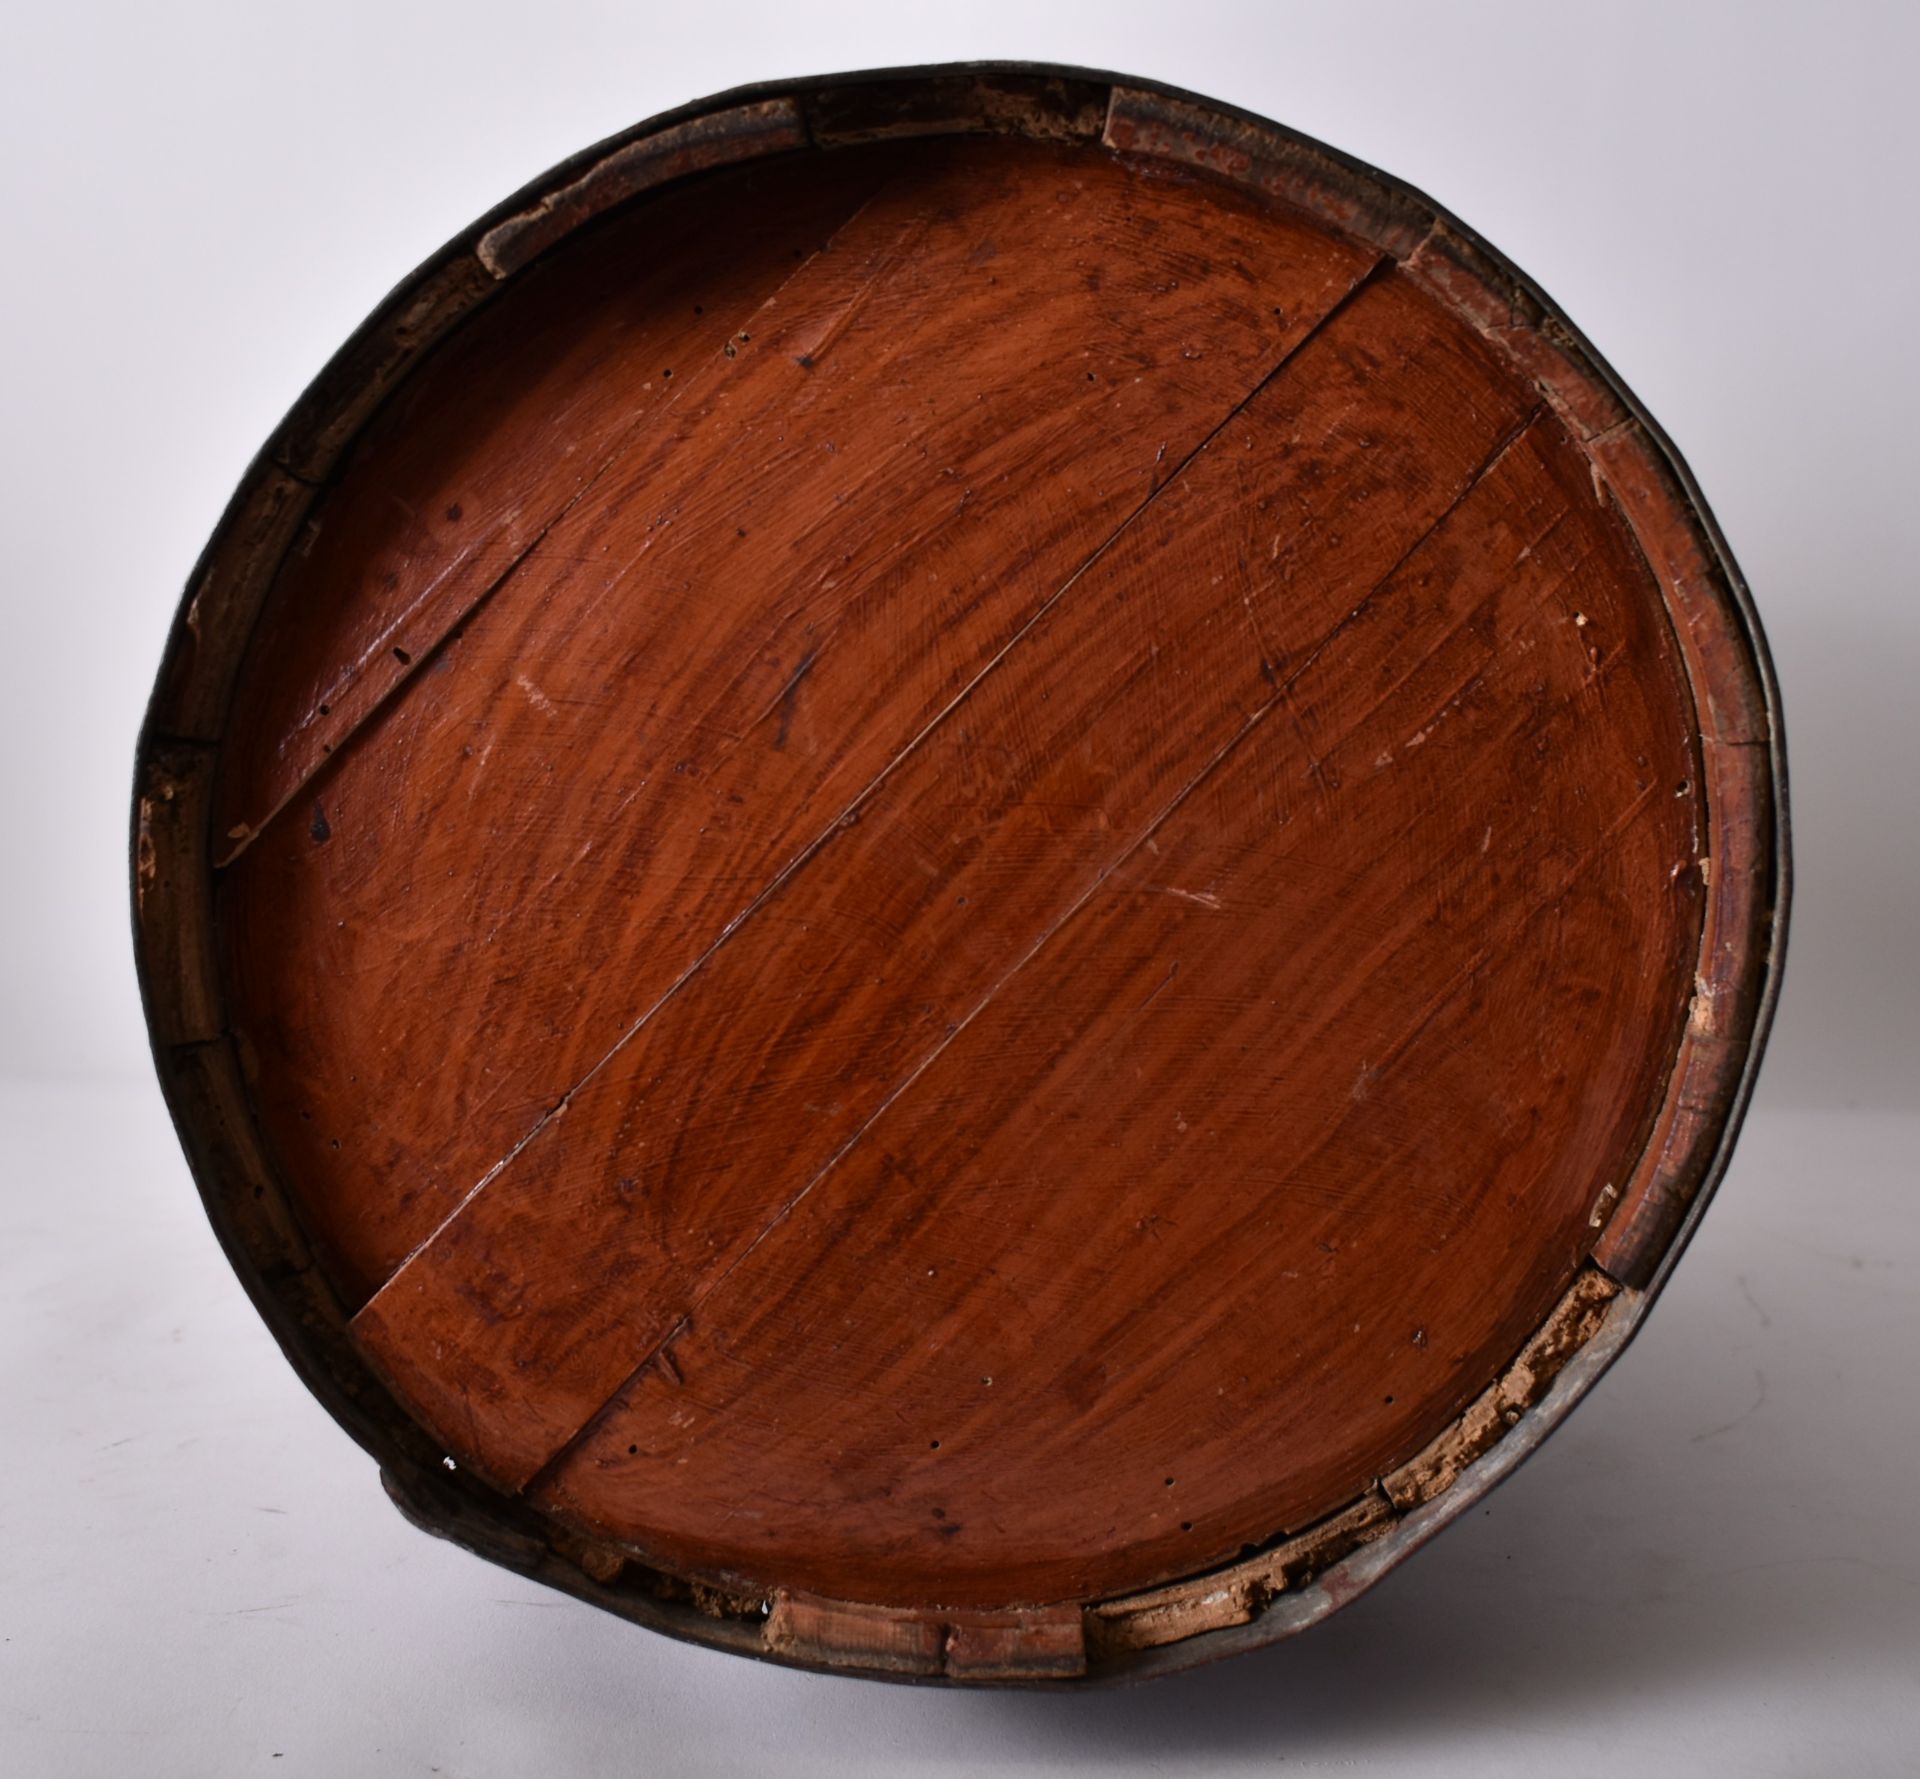 LARGE 19TH CENTURY SHIPPING SPICE BARREL WITH LID - Image 6 of 6